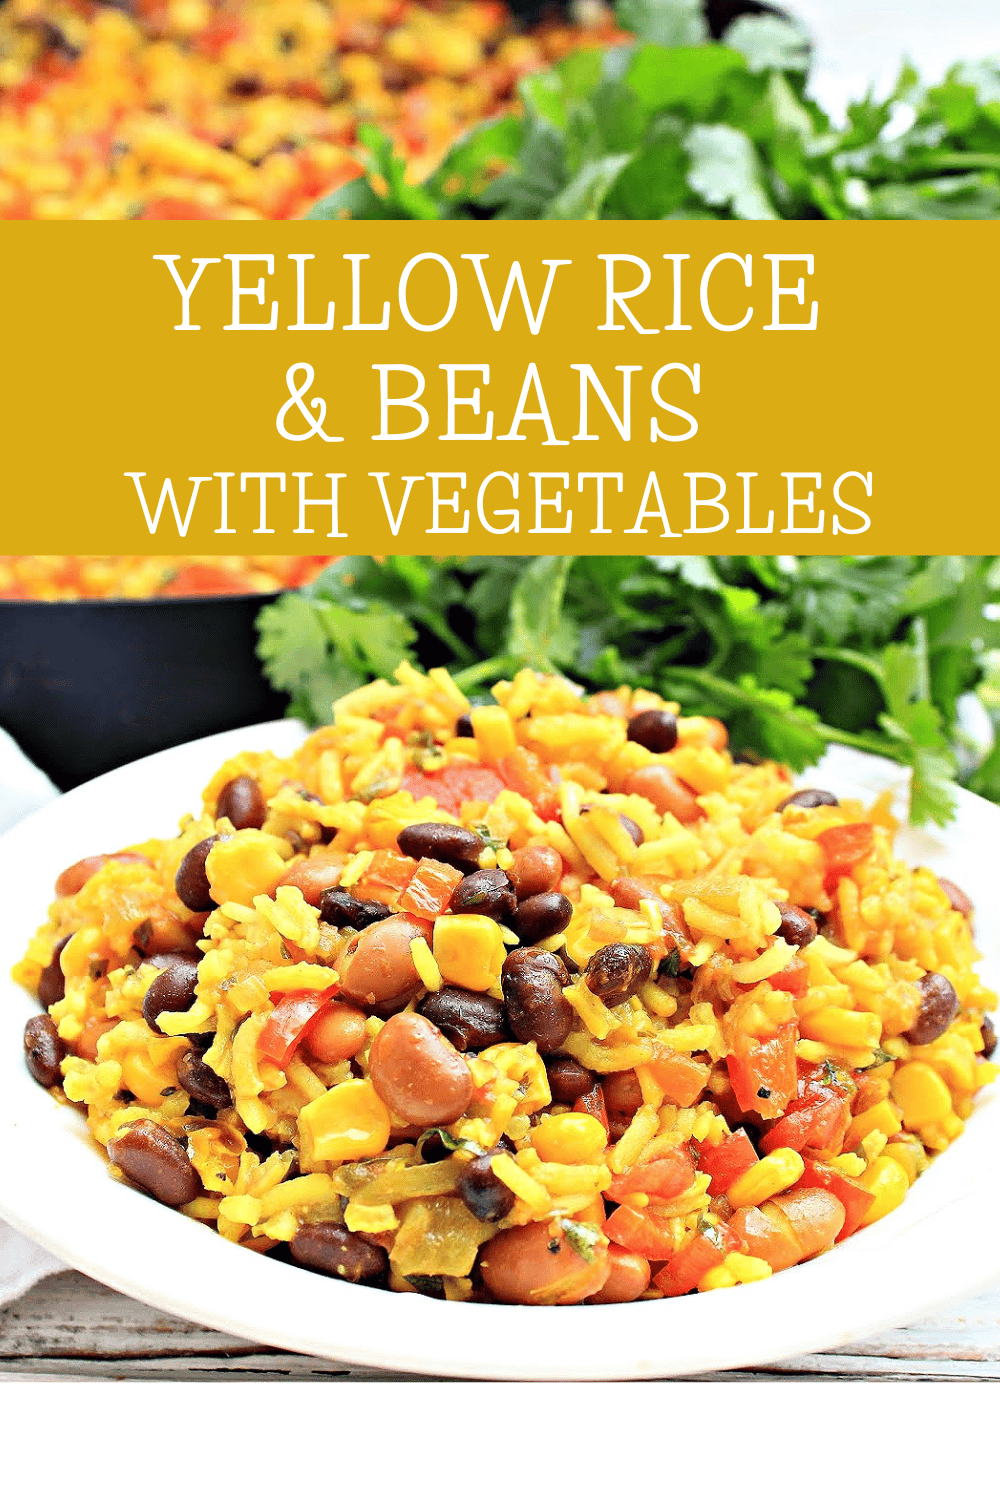 Yellow Rice and Beans with Vegetables ~ Serve this savory dish with black and pinto beans, seasoned rice, and vegetables as a hearty side dish or main course.
 via @thiswifecooks